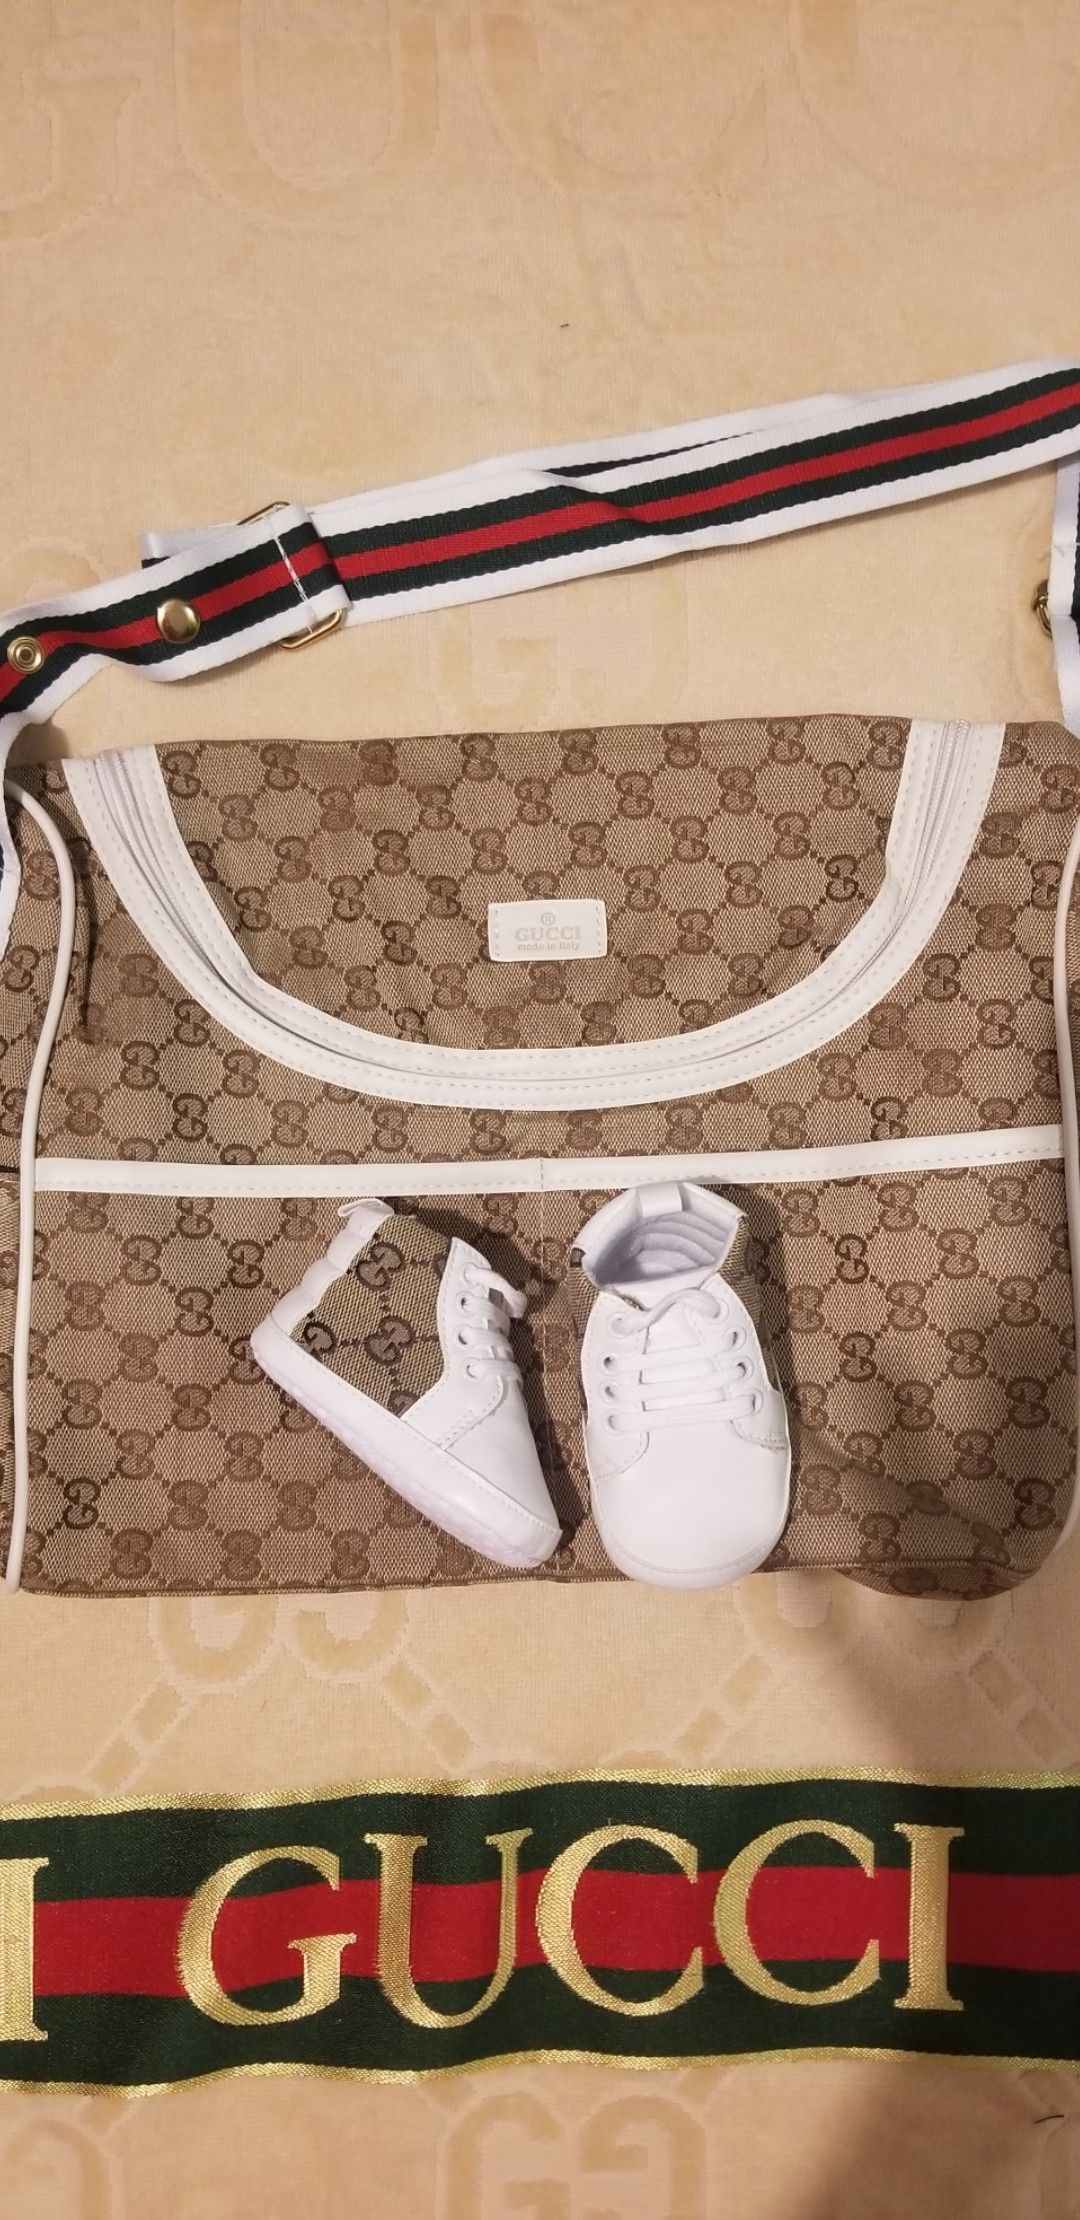 DESIGNER DIAPER BAG/TOTE (Pink,White or Brown trim) Comes with matching baby shoes! MAKE OFFER